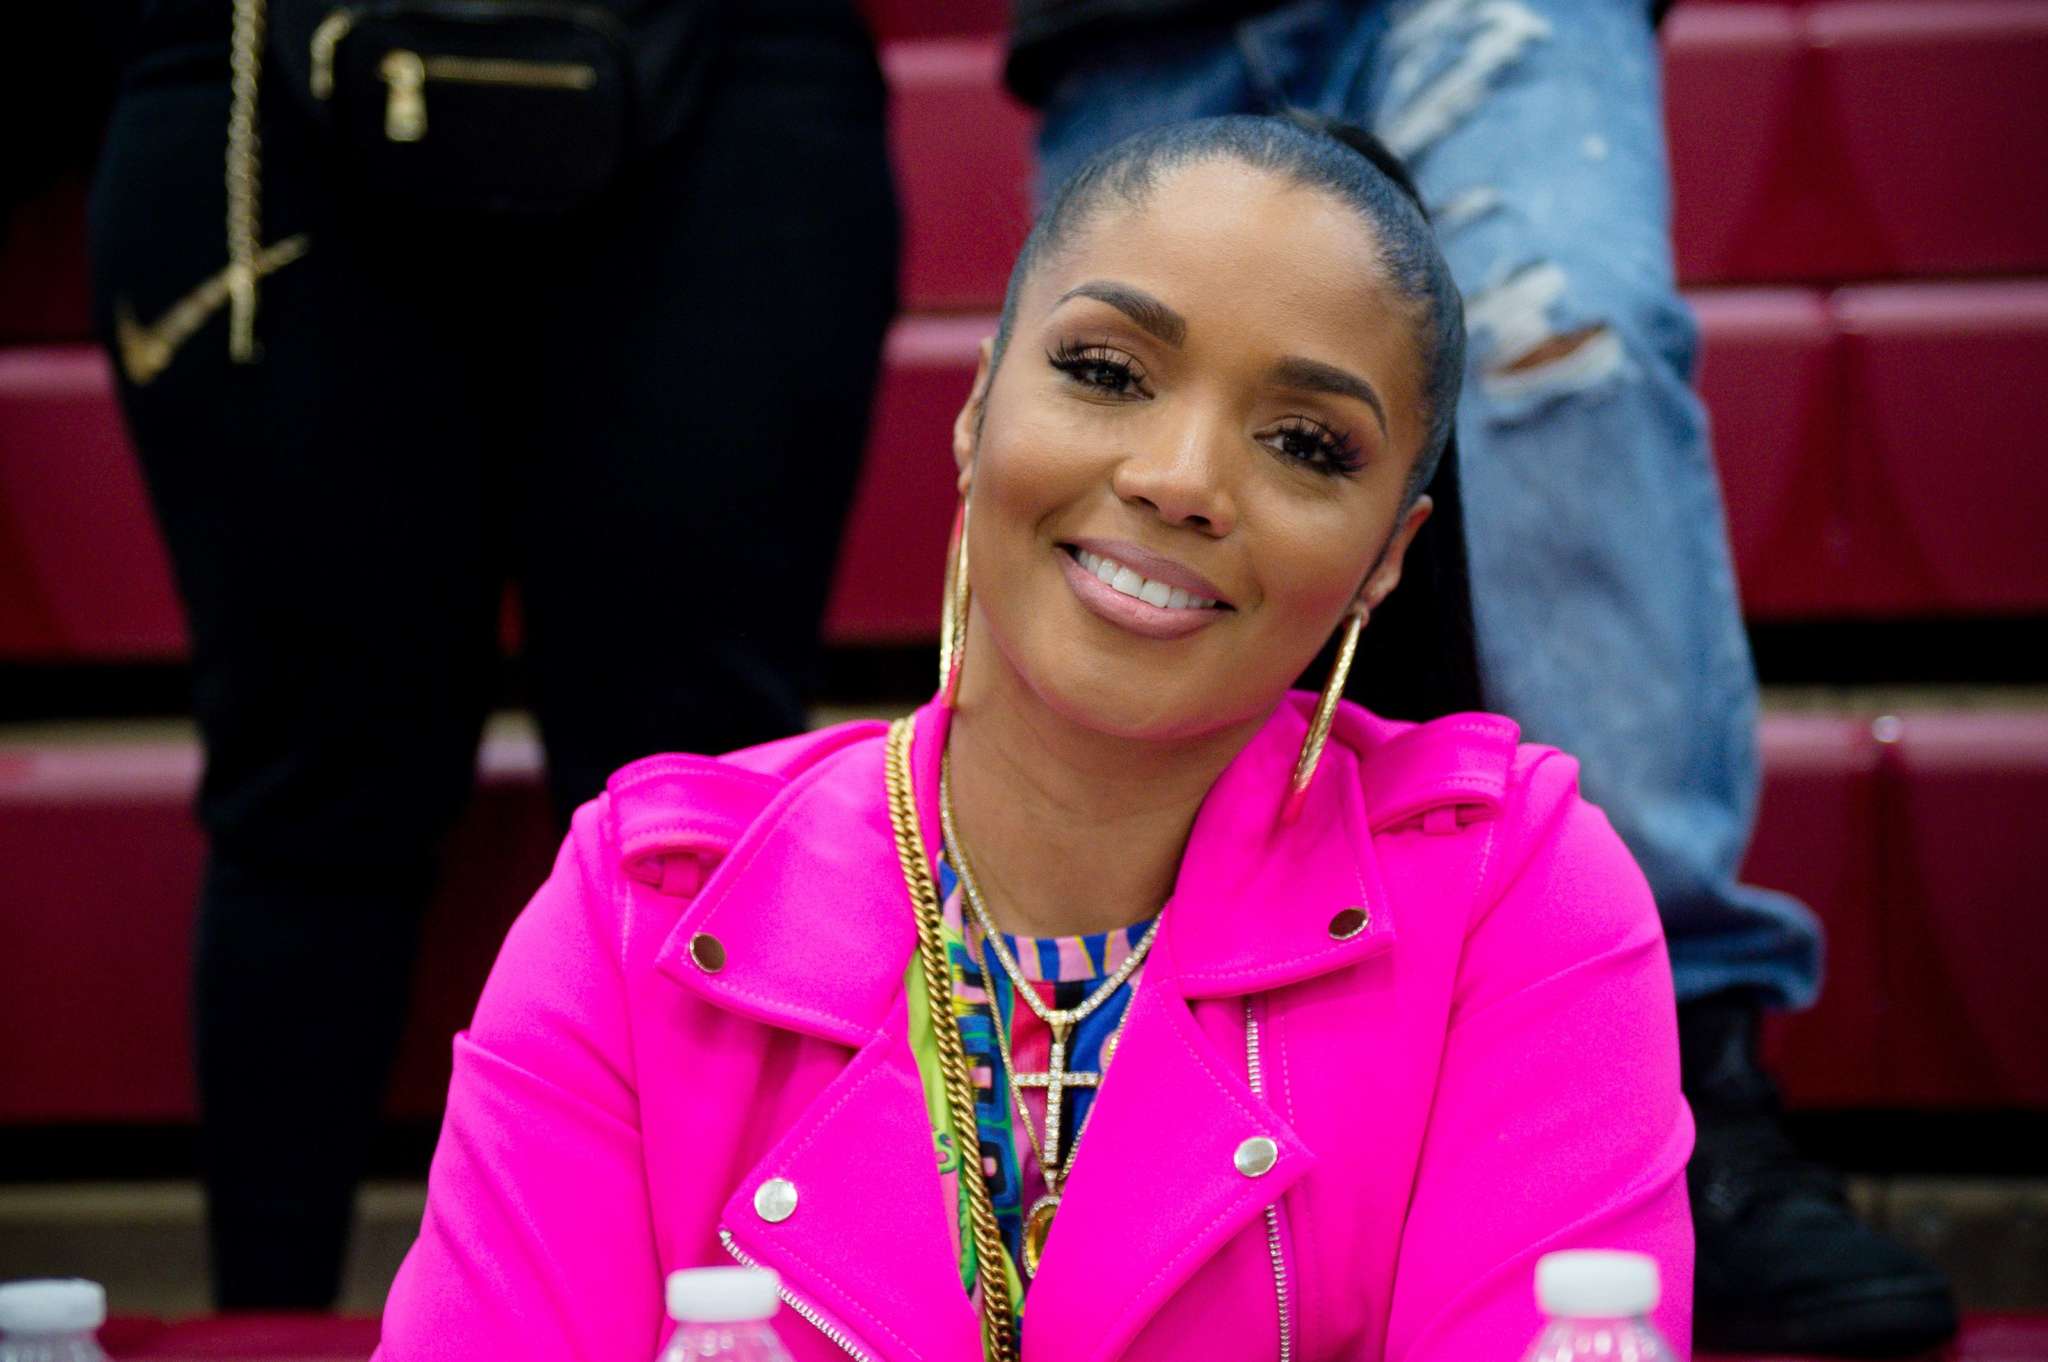 Rasheeda Frost Suffers A Great Loss: She's Devastated By The Death Of A Loved One - Kirk Frost Is Left Without Words